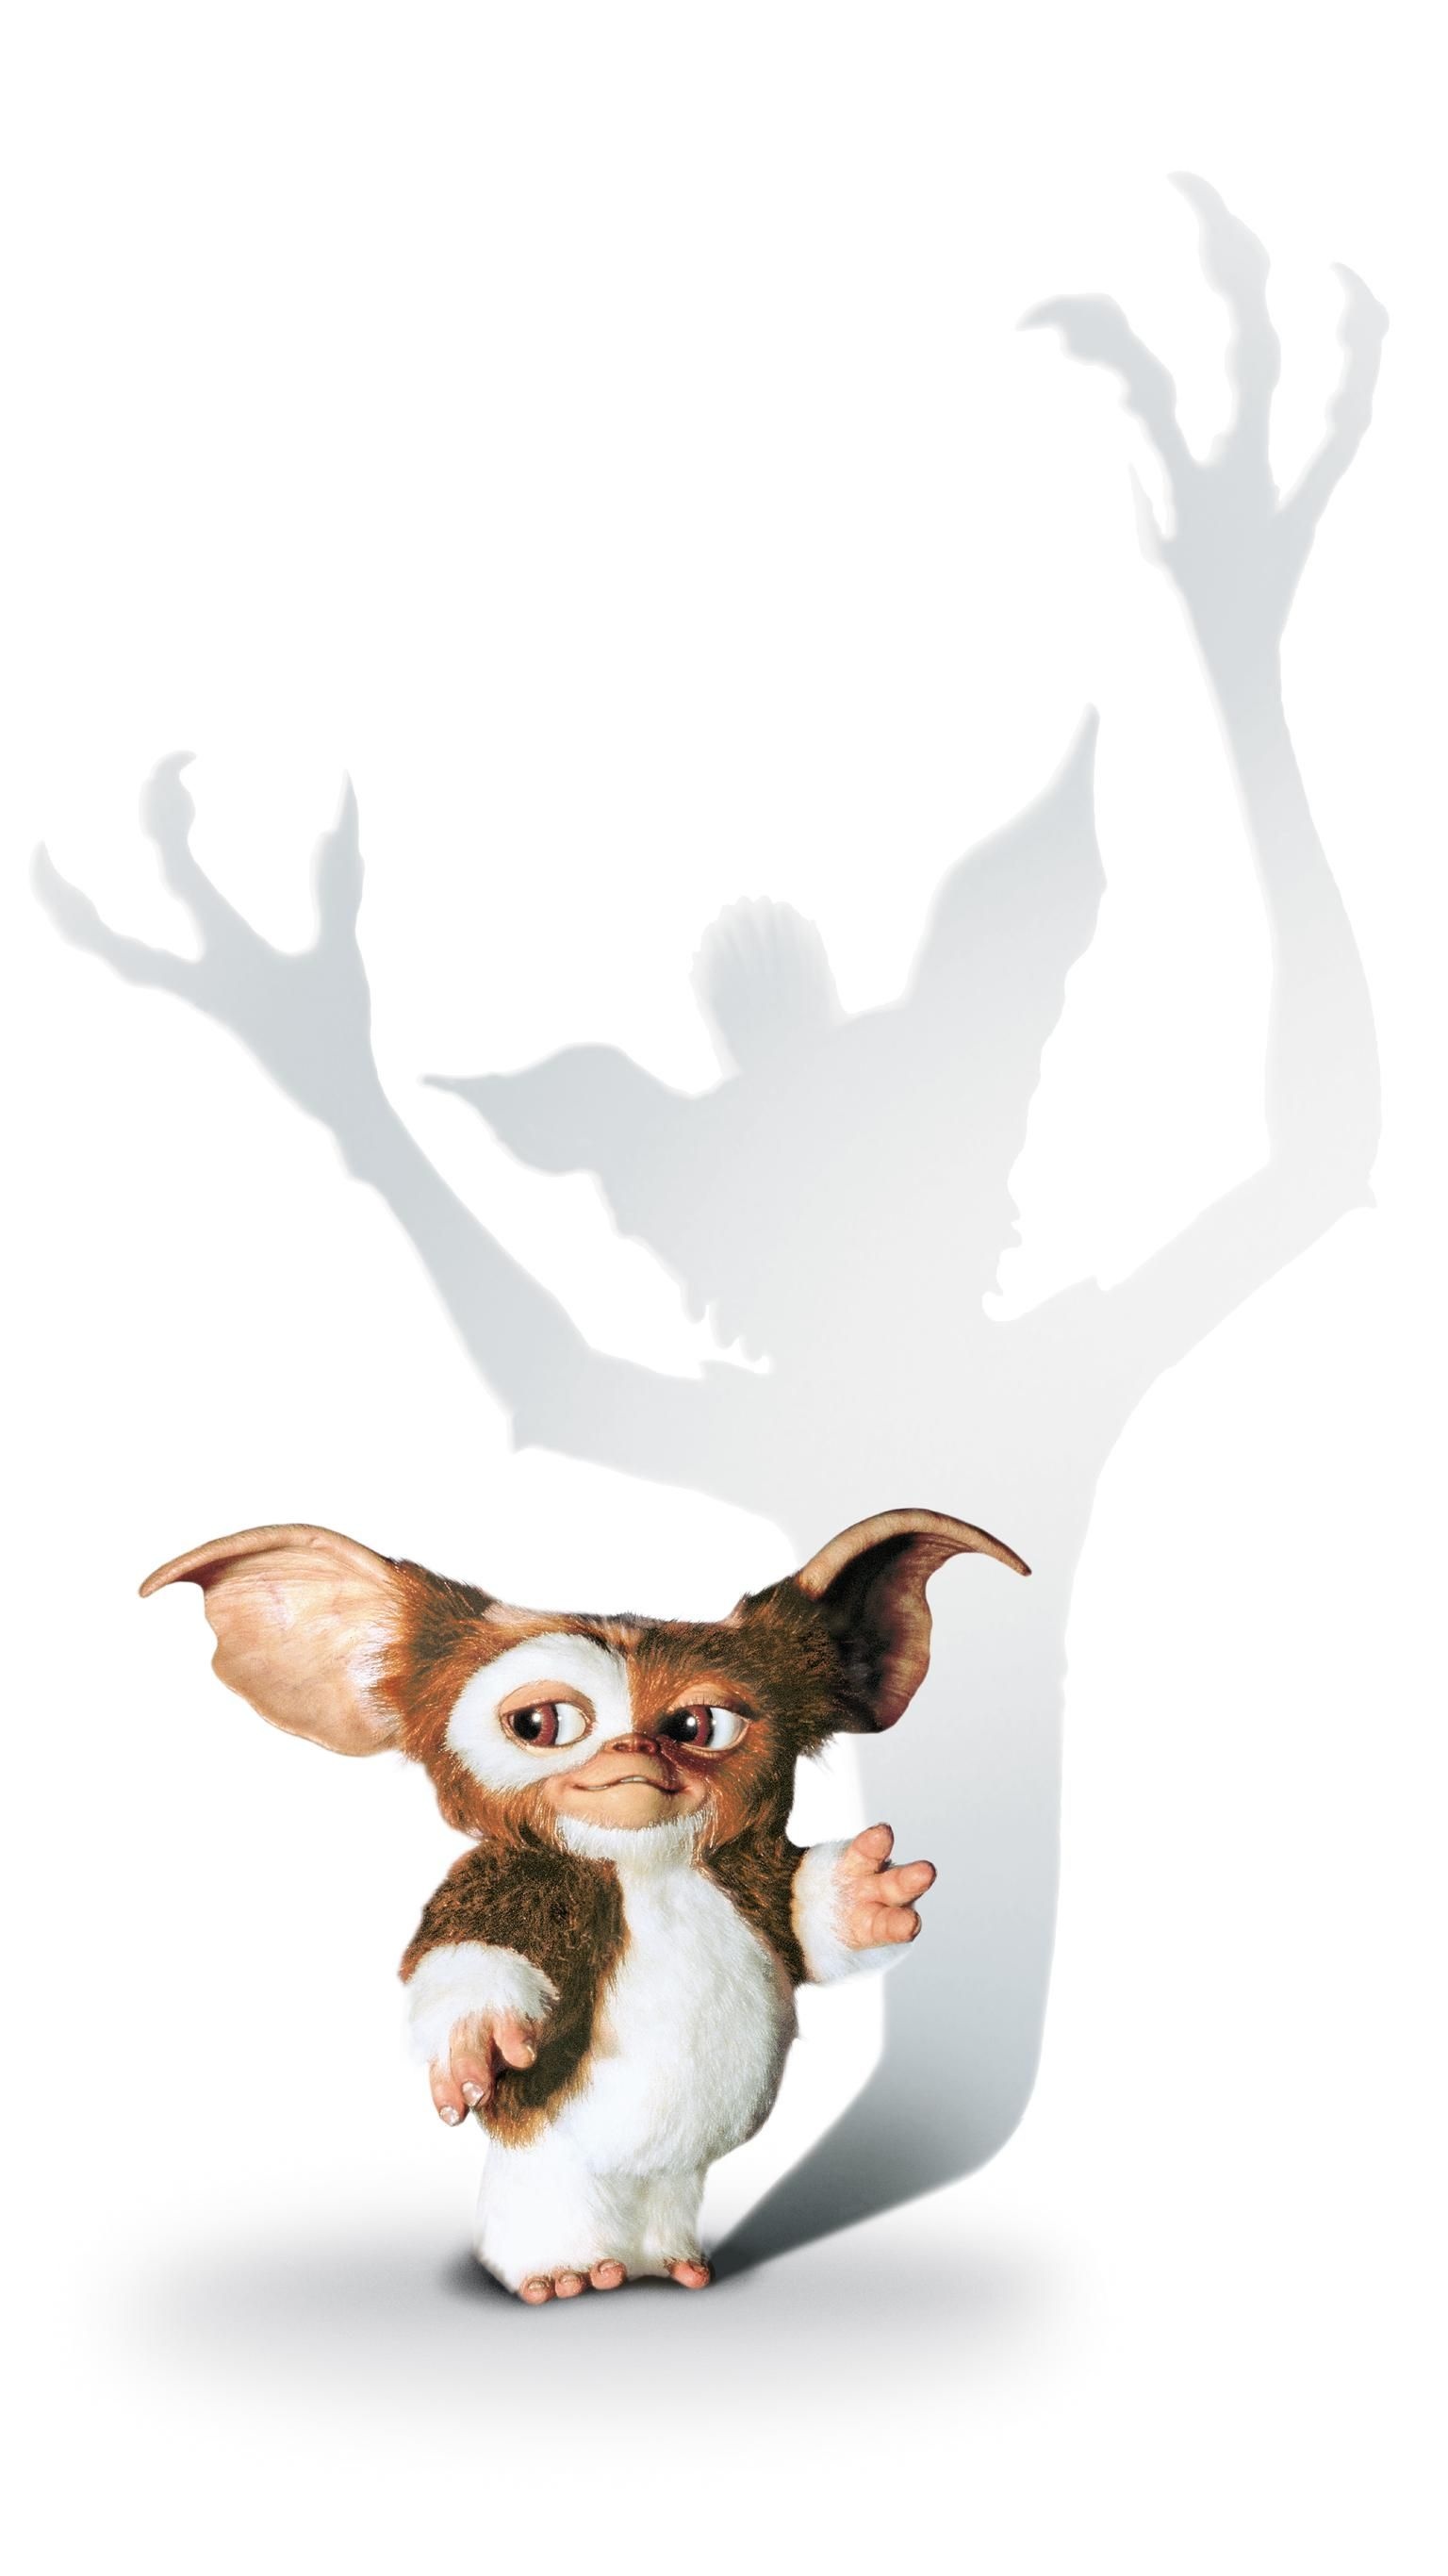 Gremlin: Small, furry creature with large ears, big eyes, and a cute appearance. 1540x2740 HD Wallpaper.